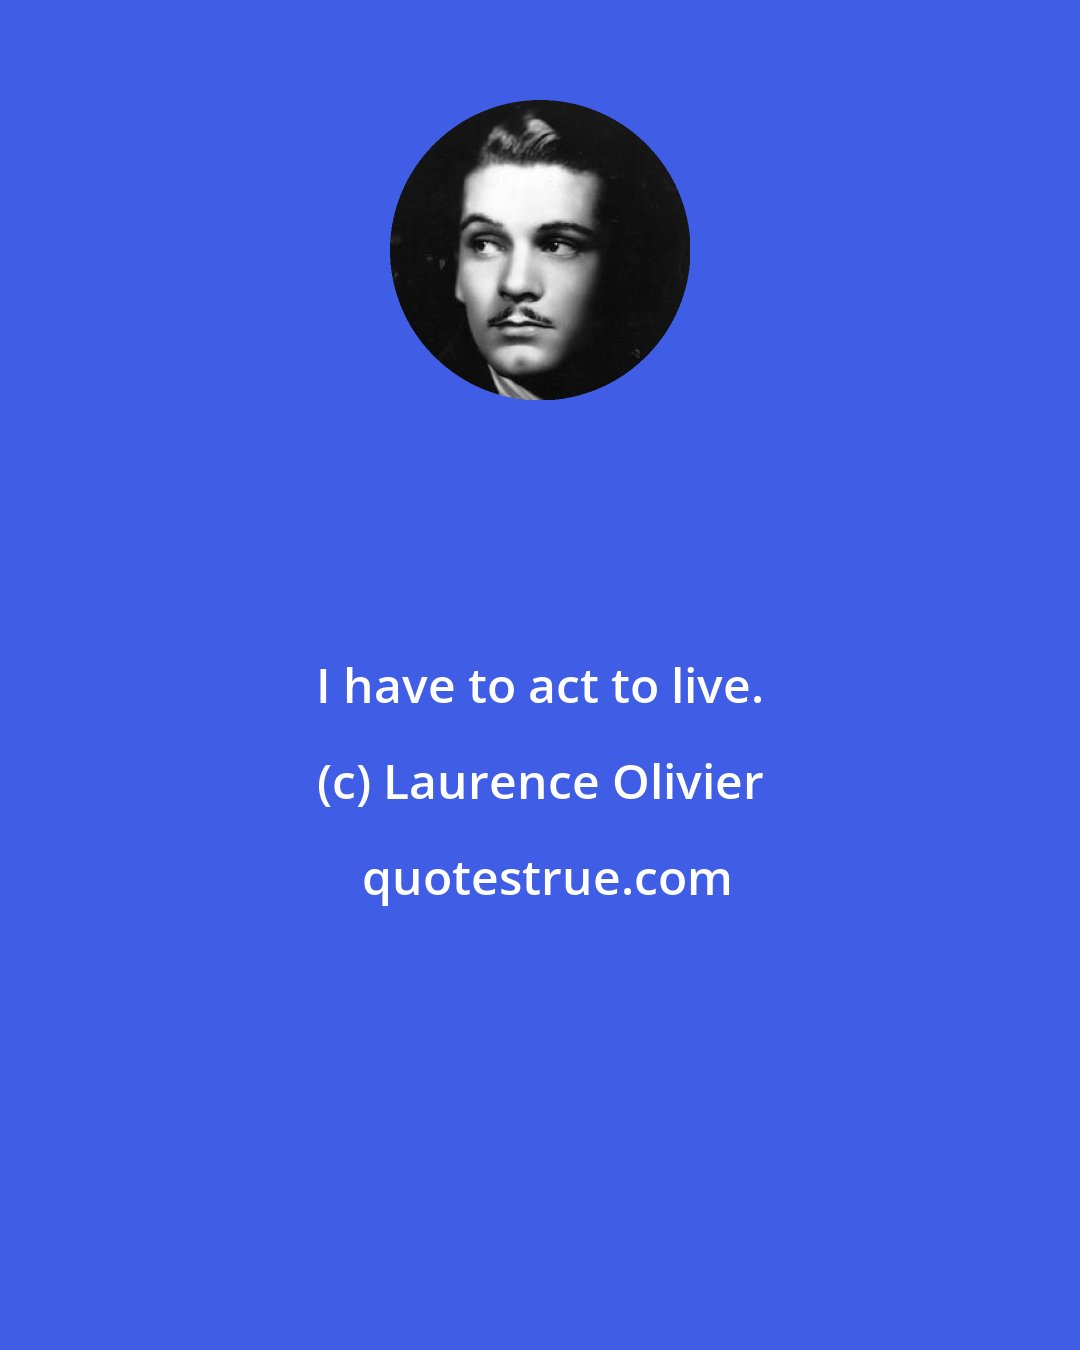 Laurence Olivier: I have to act to live.